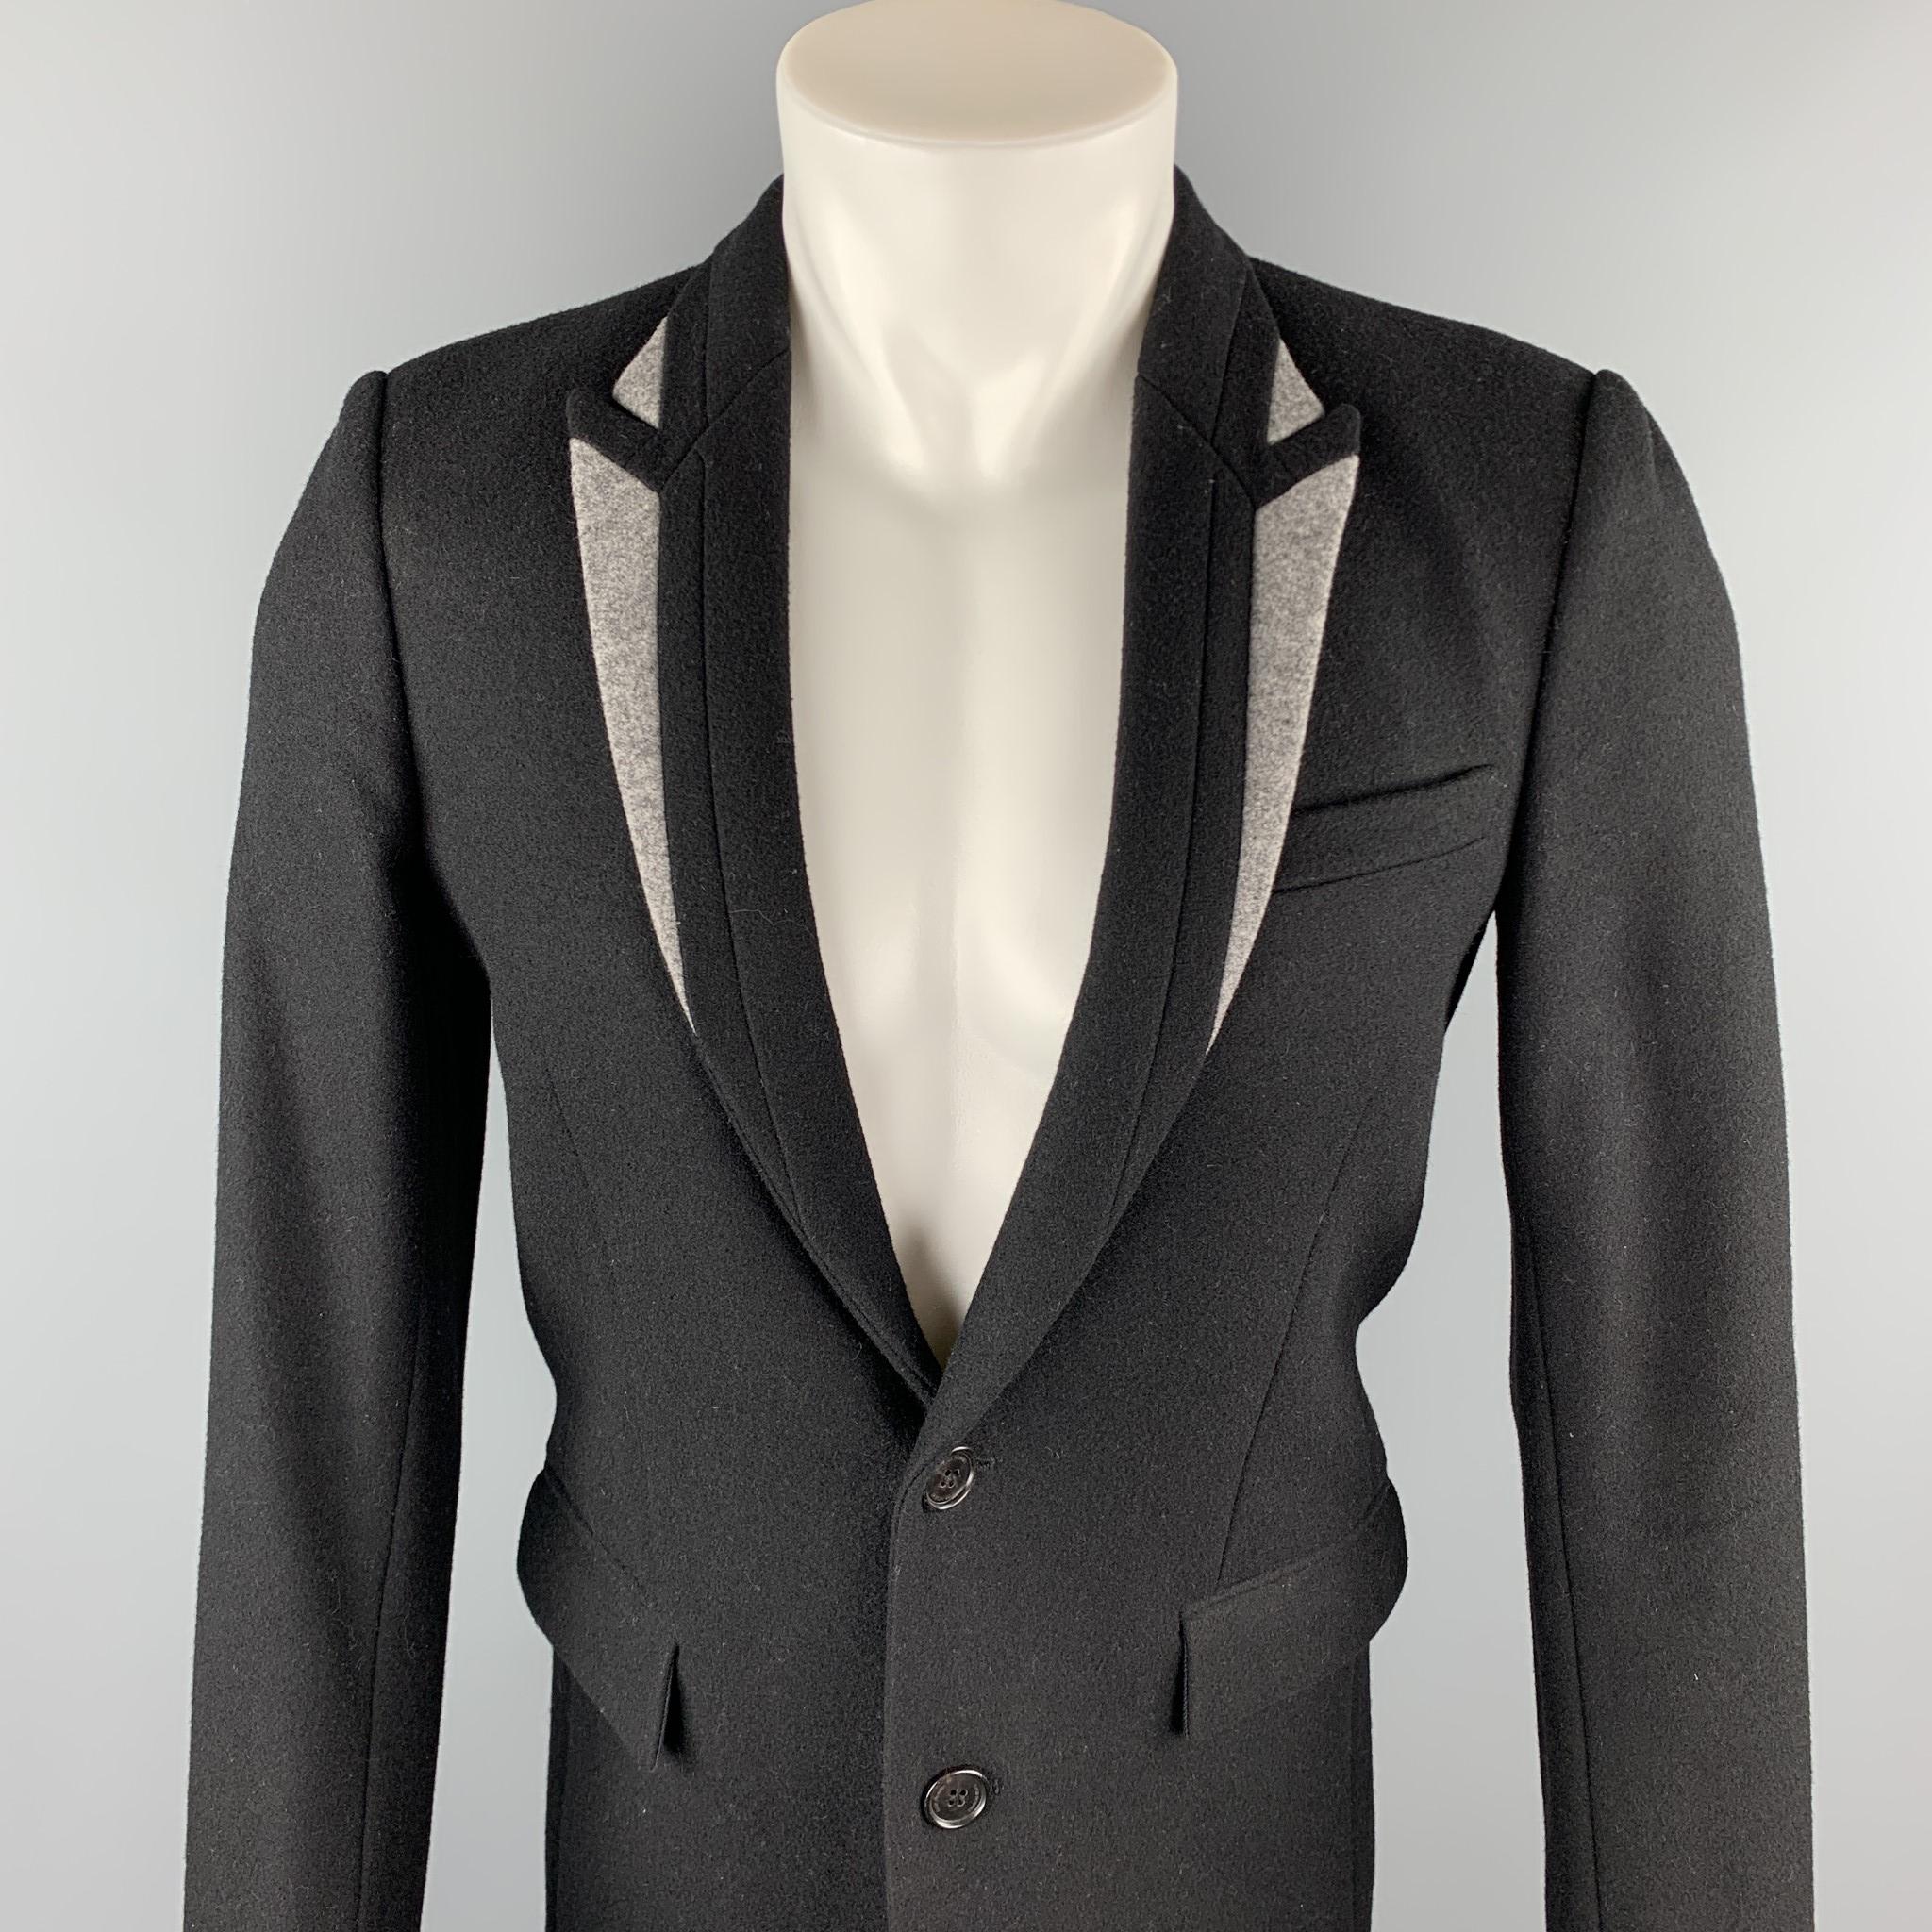 DIOR HOMME coat comes in a black & gray wool / polyamide featuring a peak lapel, flap pockets, and a two button closure. Made in Italy.

Very Good Pre-Owned Condition.
Marked:  IT 46

Measurements:

Shoulder: 16.5  in. 
Chest: 37 in. 
Sleeve: 26 in.